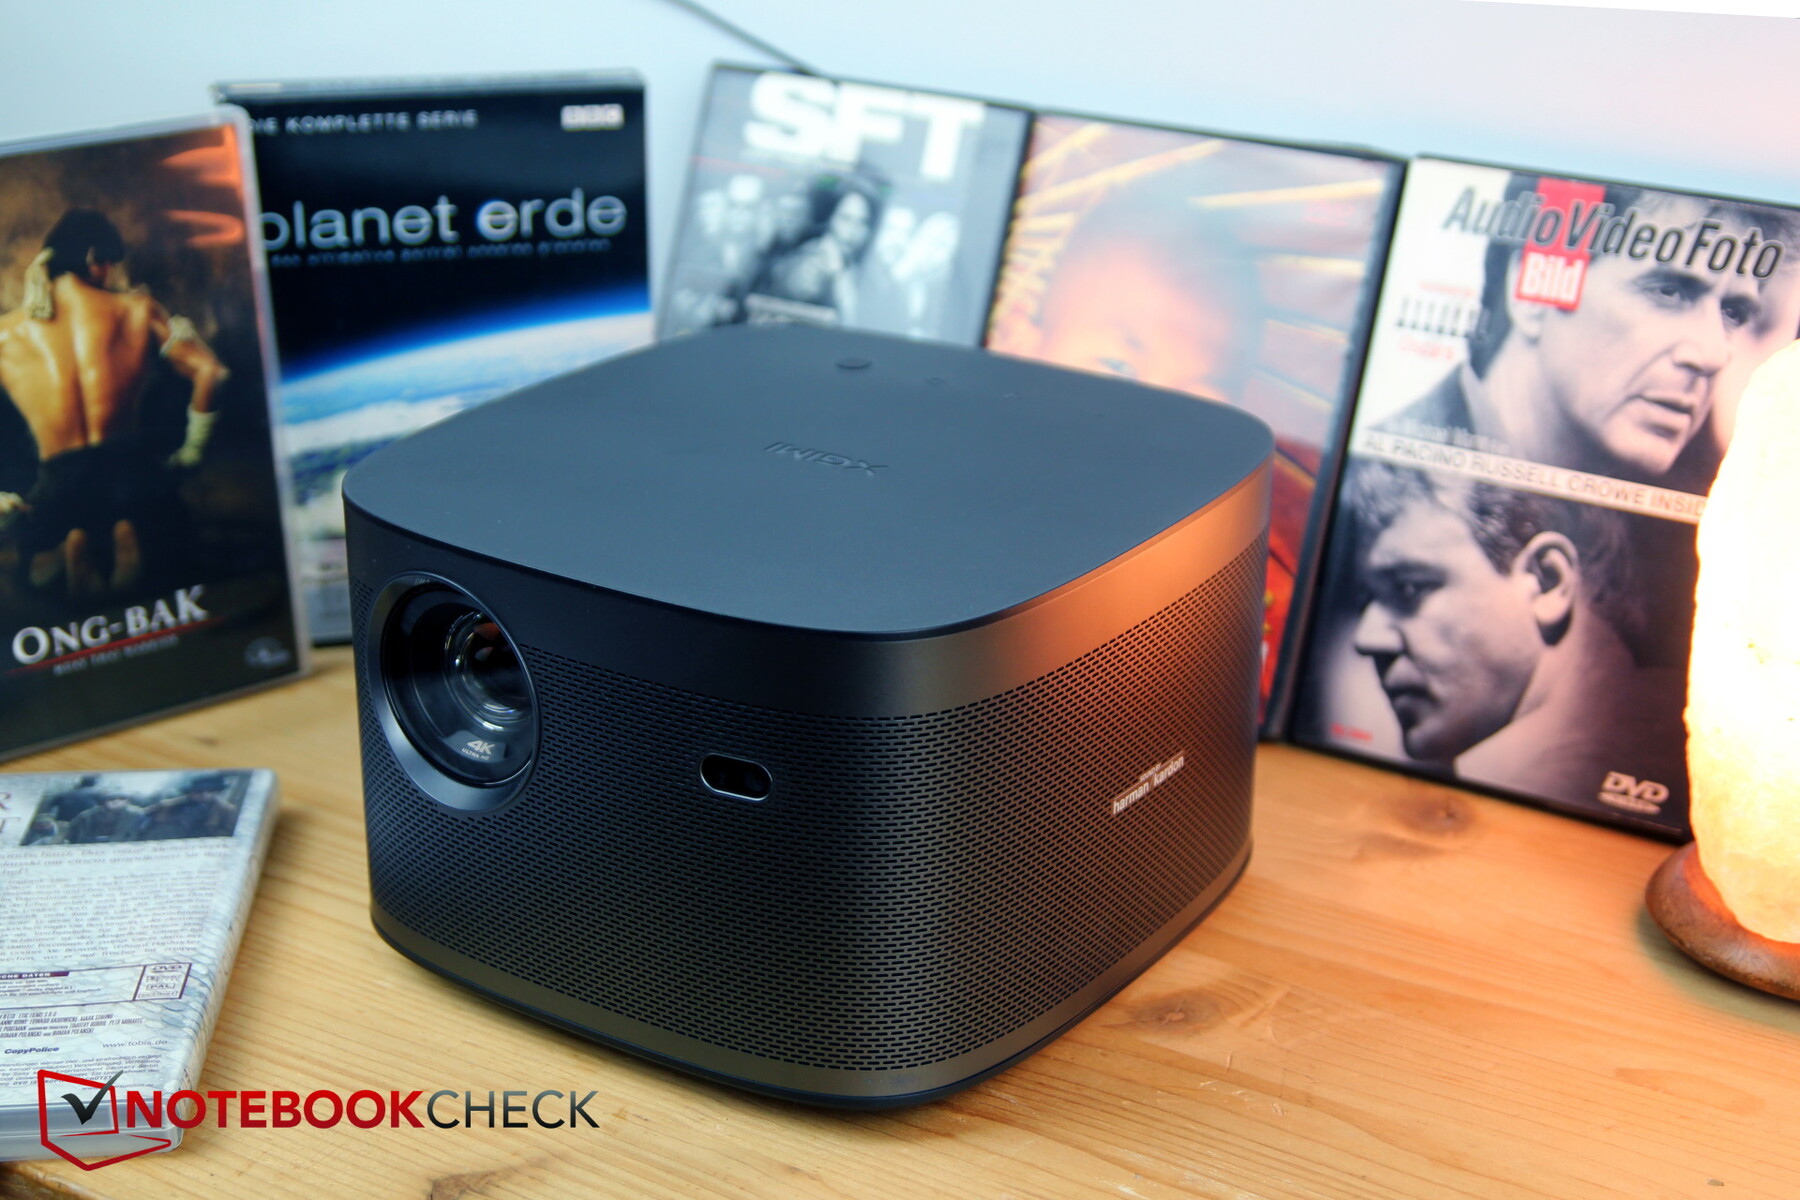 XGIMI Horizon Ultra 4K Long Throw Projector Review: Power and